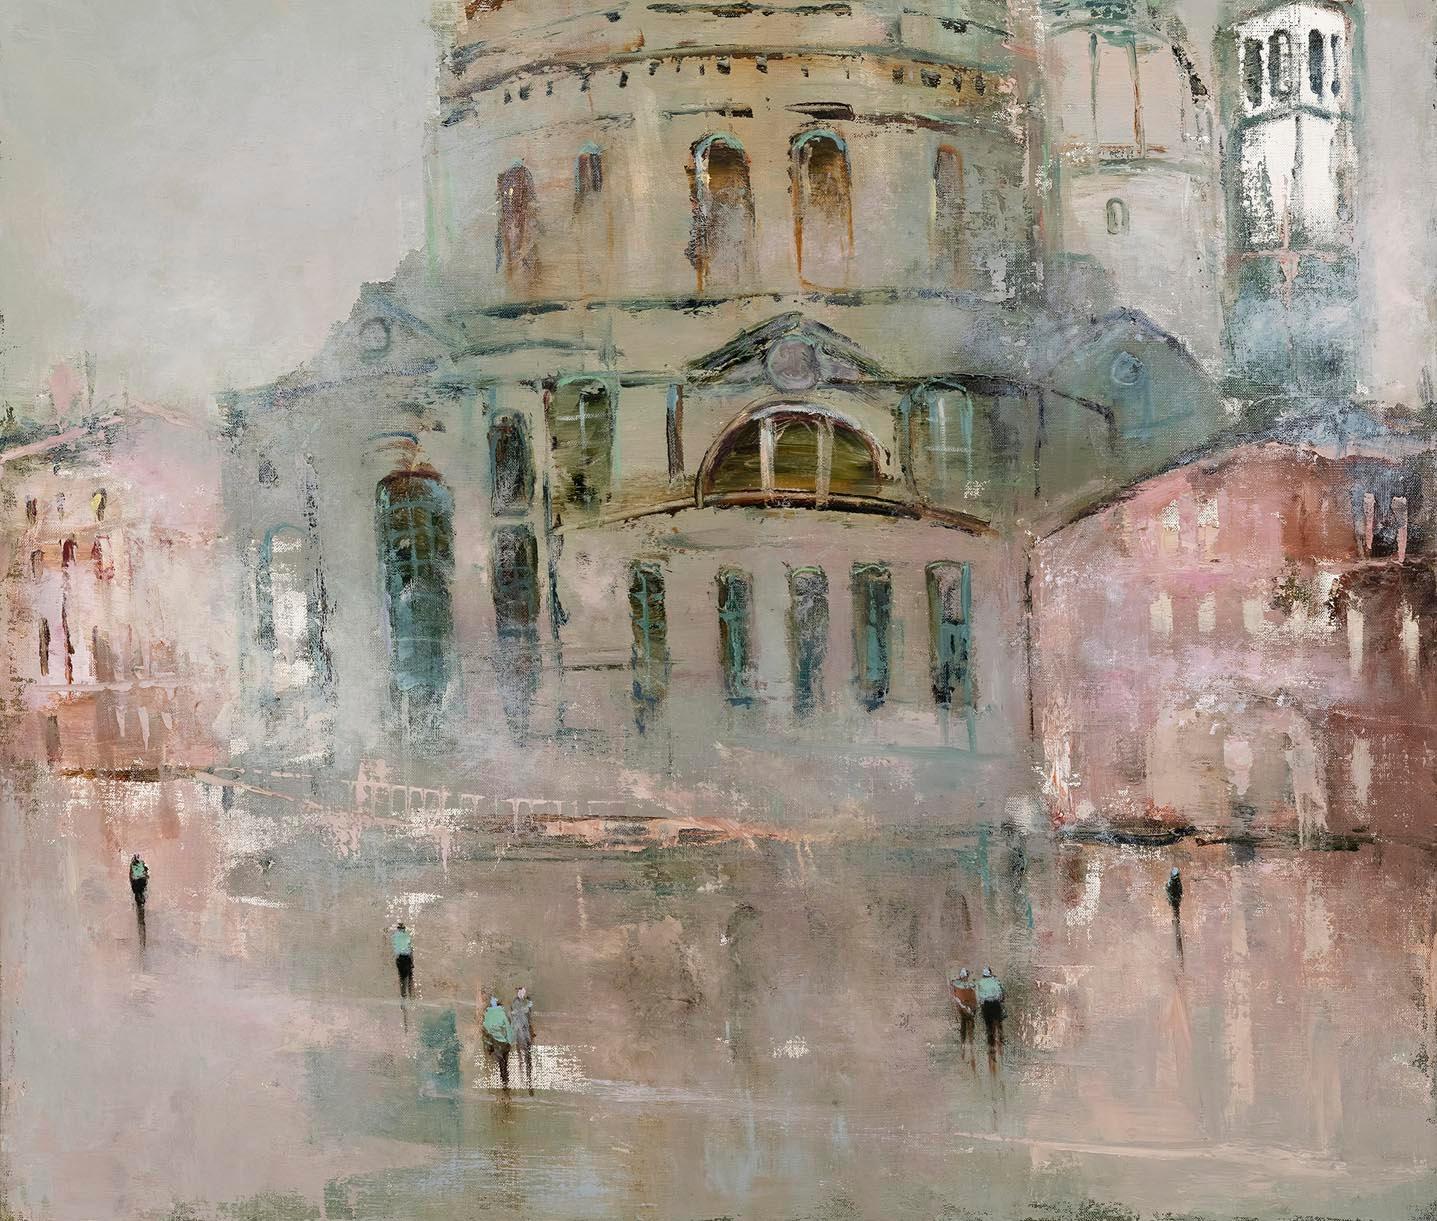 Ethereal city scene by Canadian master, France Jodoin. Her cityscapes are imagined by France as she develops a painting on the canvas. She creates a sense of mystery and narrative in her imaginative compositions while simultaneously managing to